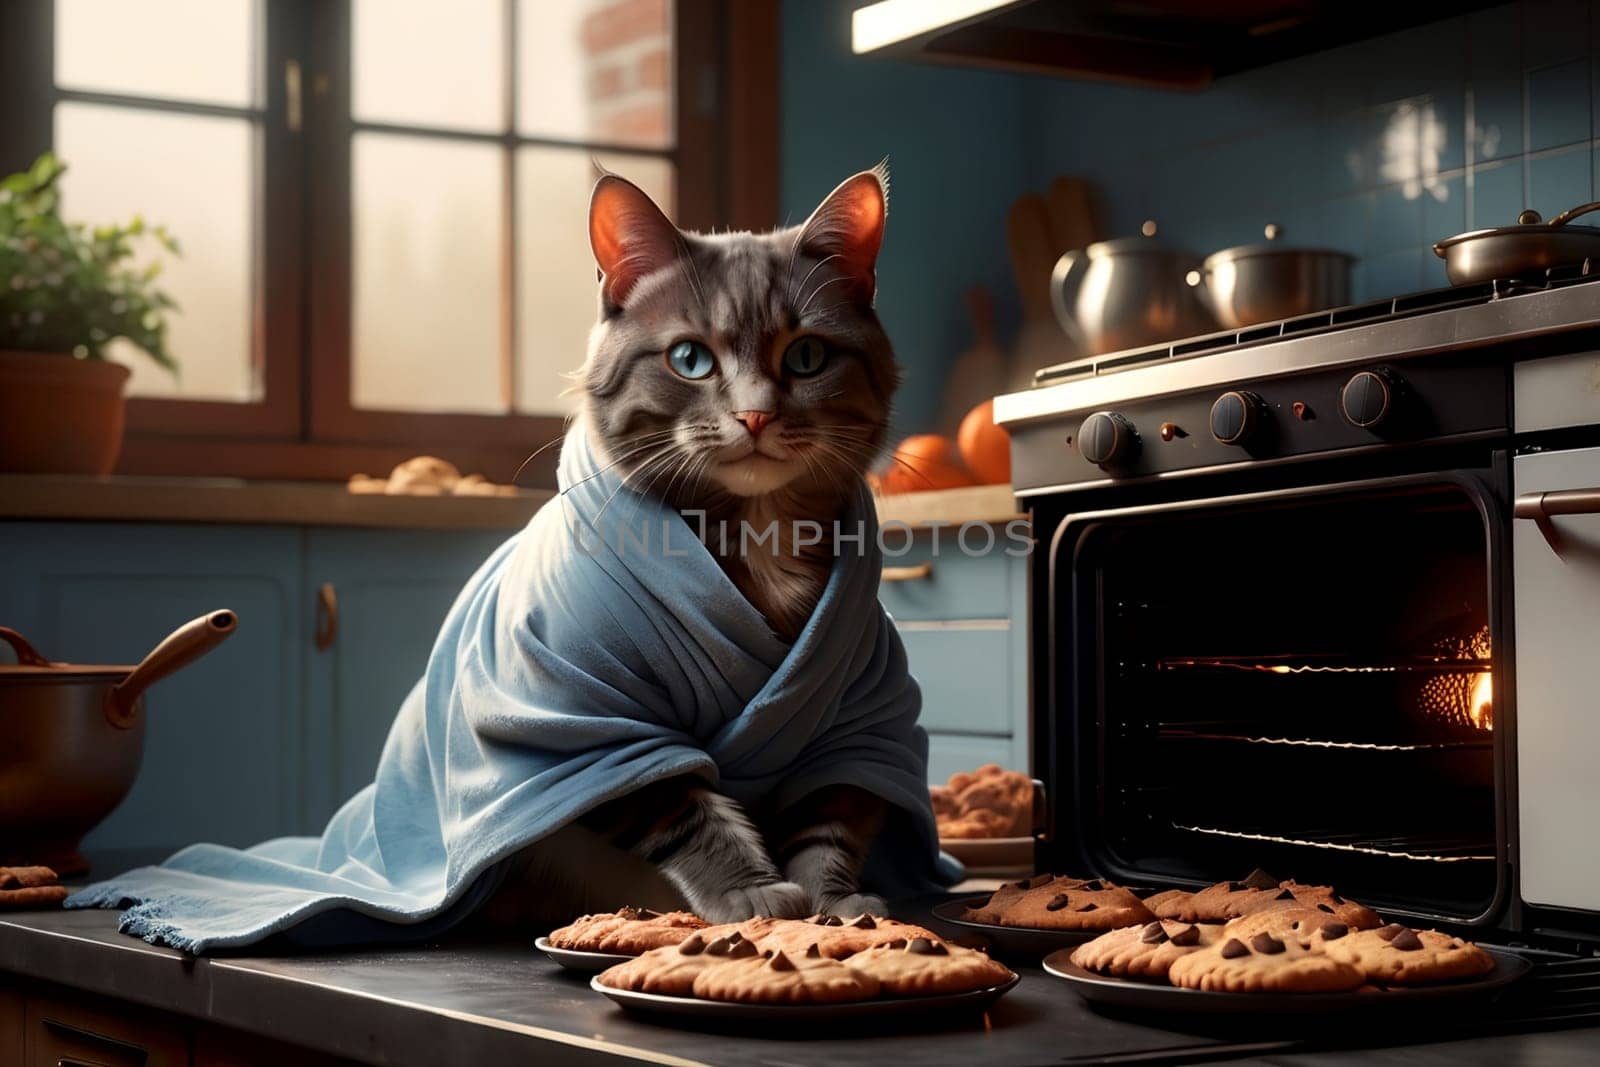 cat in a bathrobe bakes cookies in the kitchen .